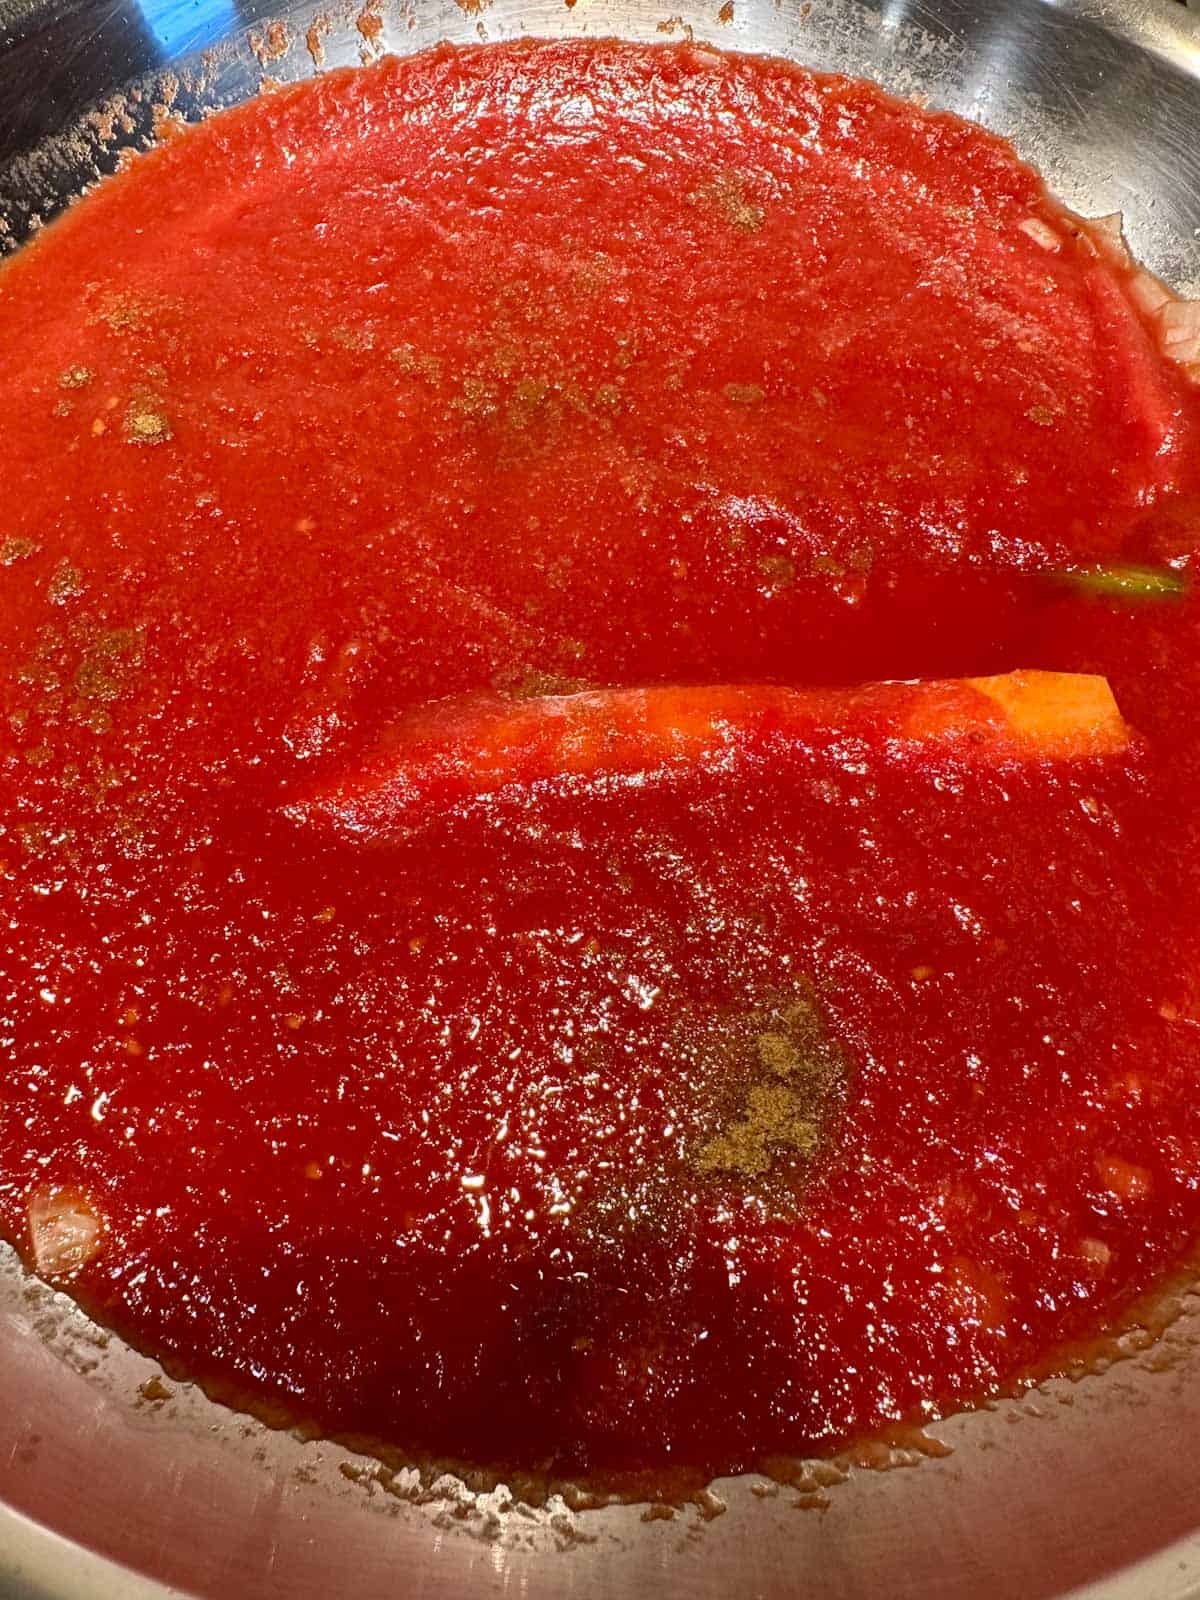 Tomato sauce cooking in a skillet.